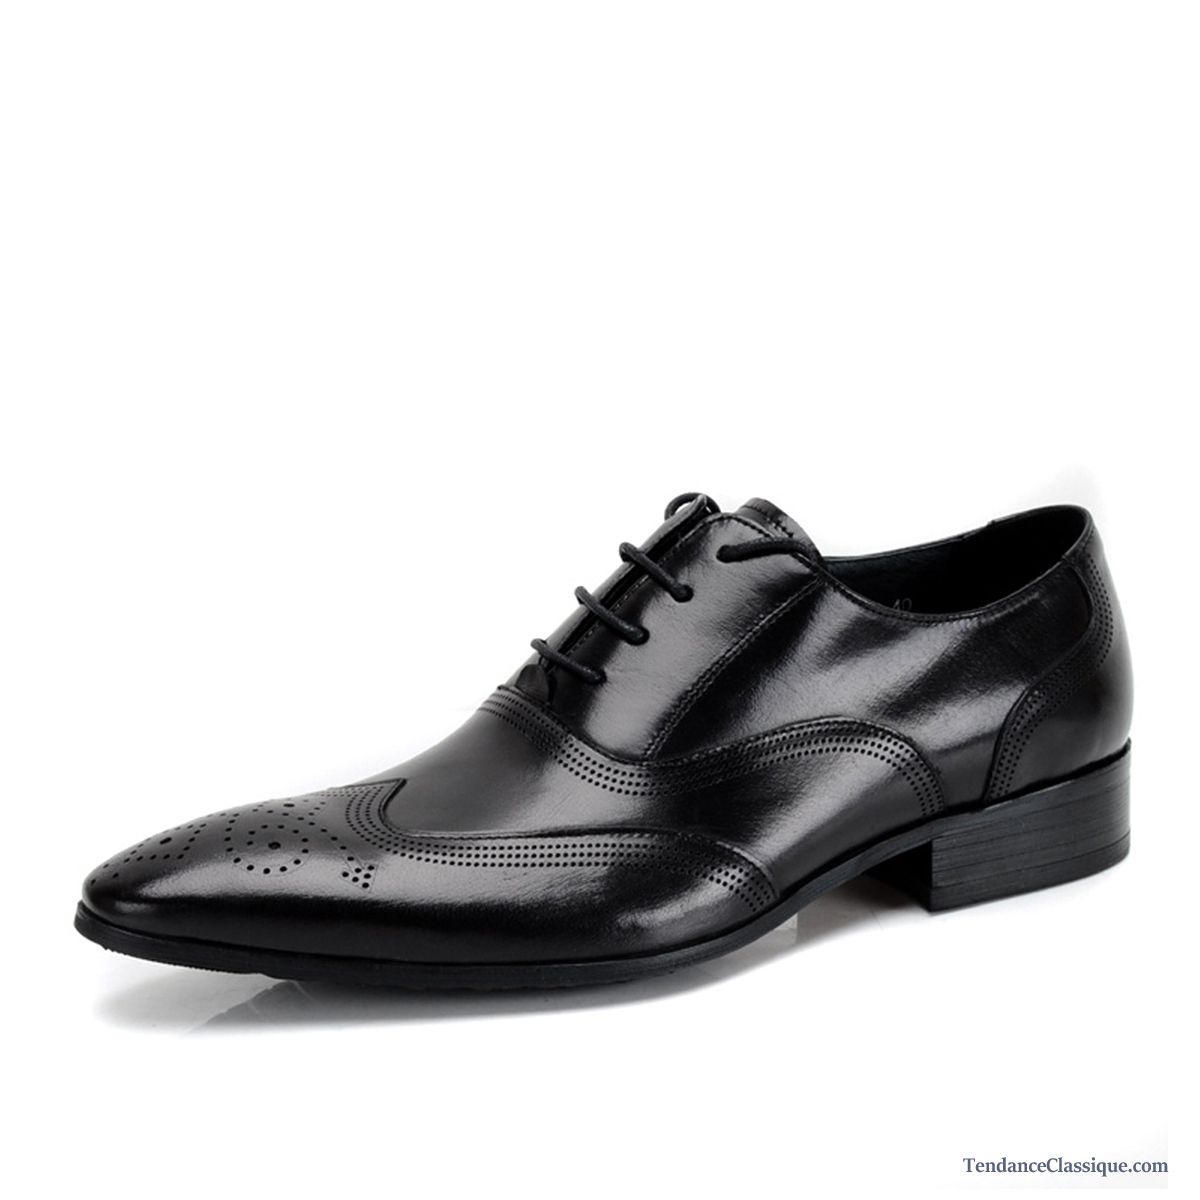 Chaussures Homme Cuir Noir Rubine, Soldes Chaussures Homme